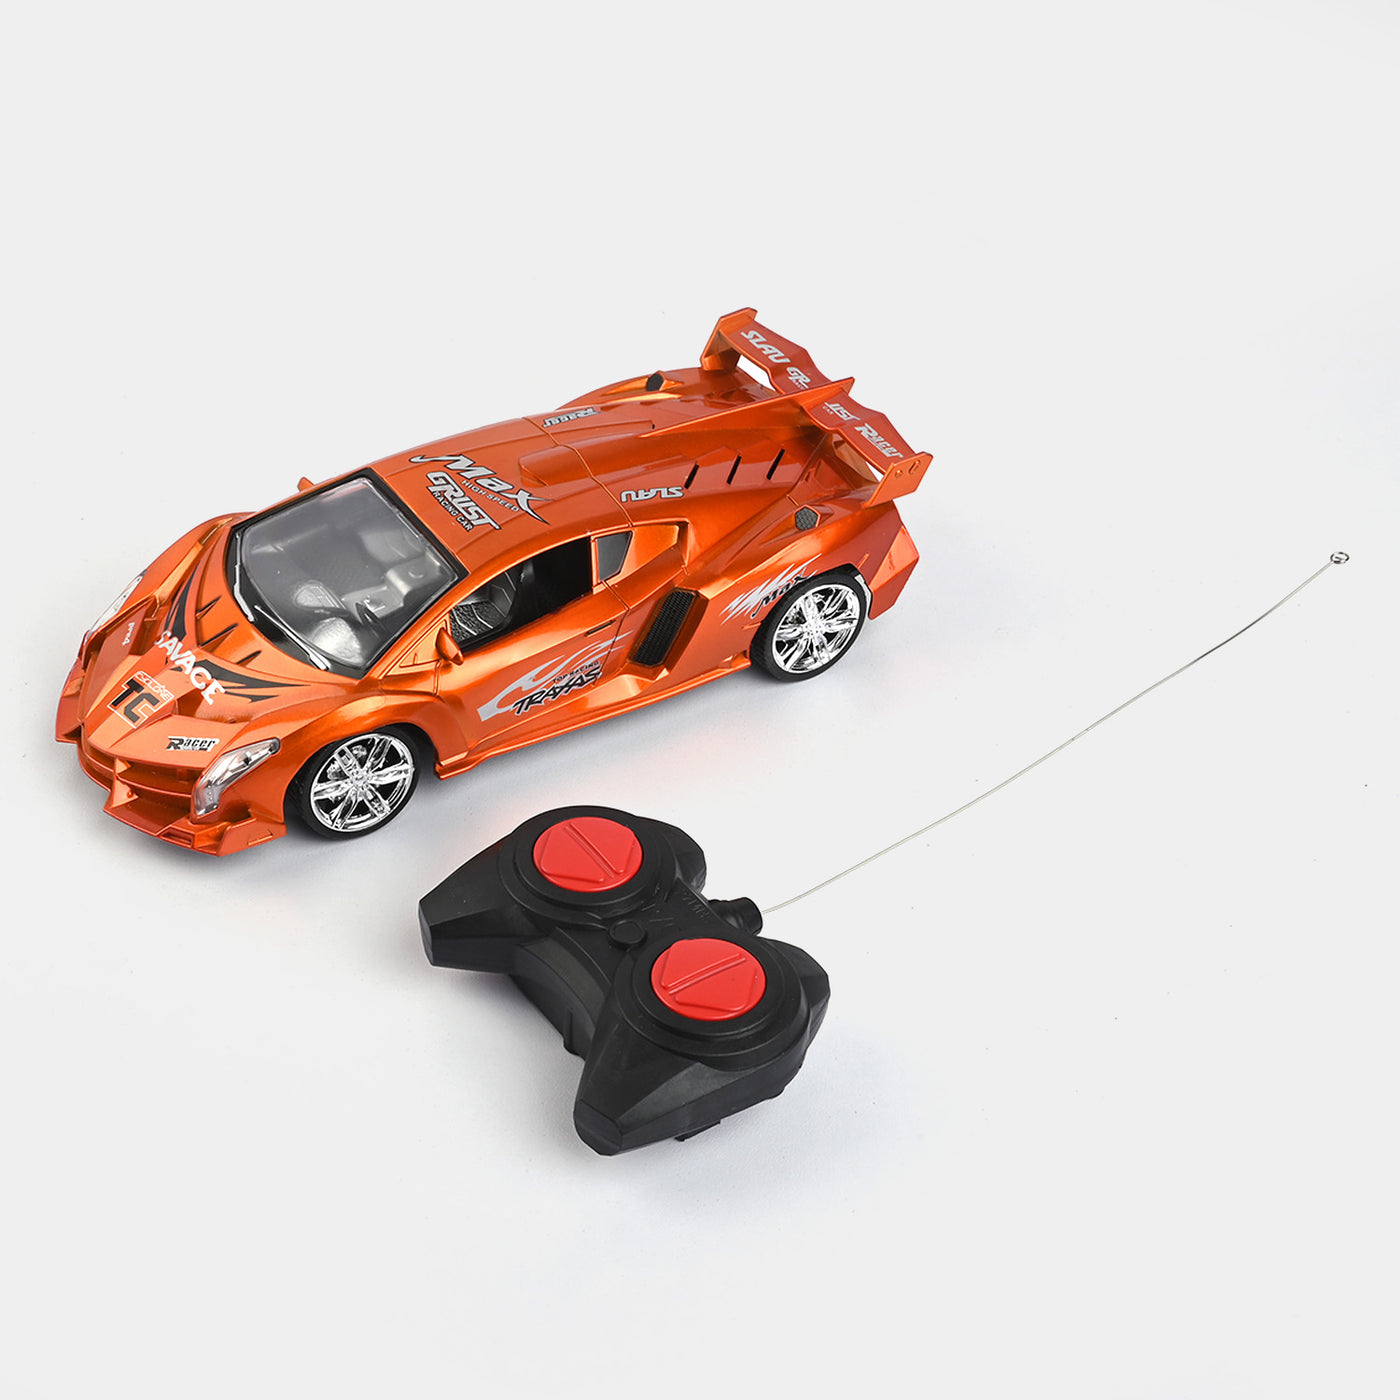 4 Function Remote Control Car For Kids